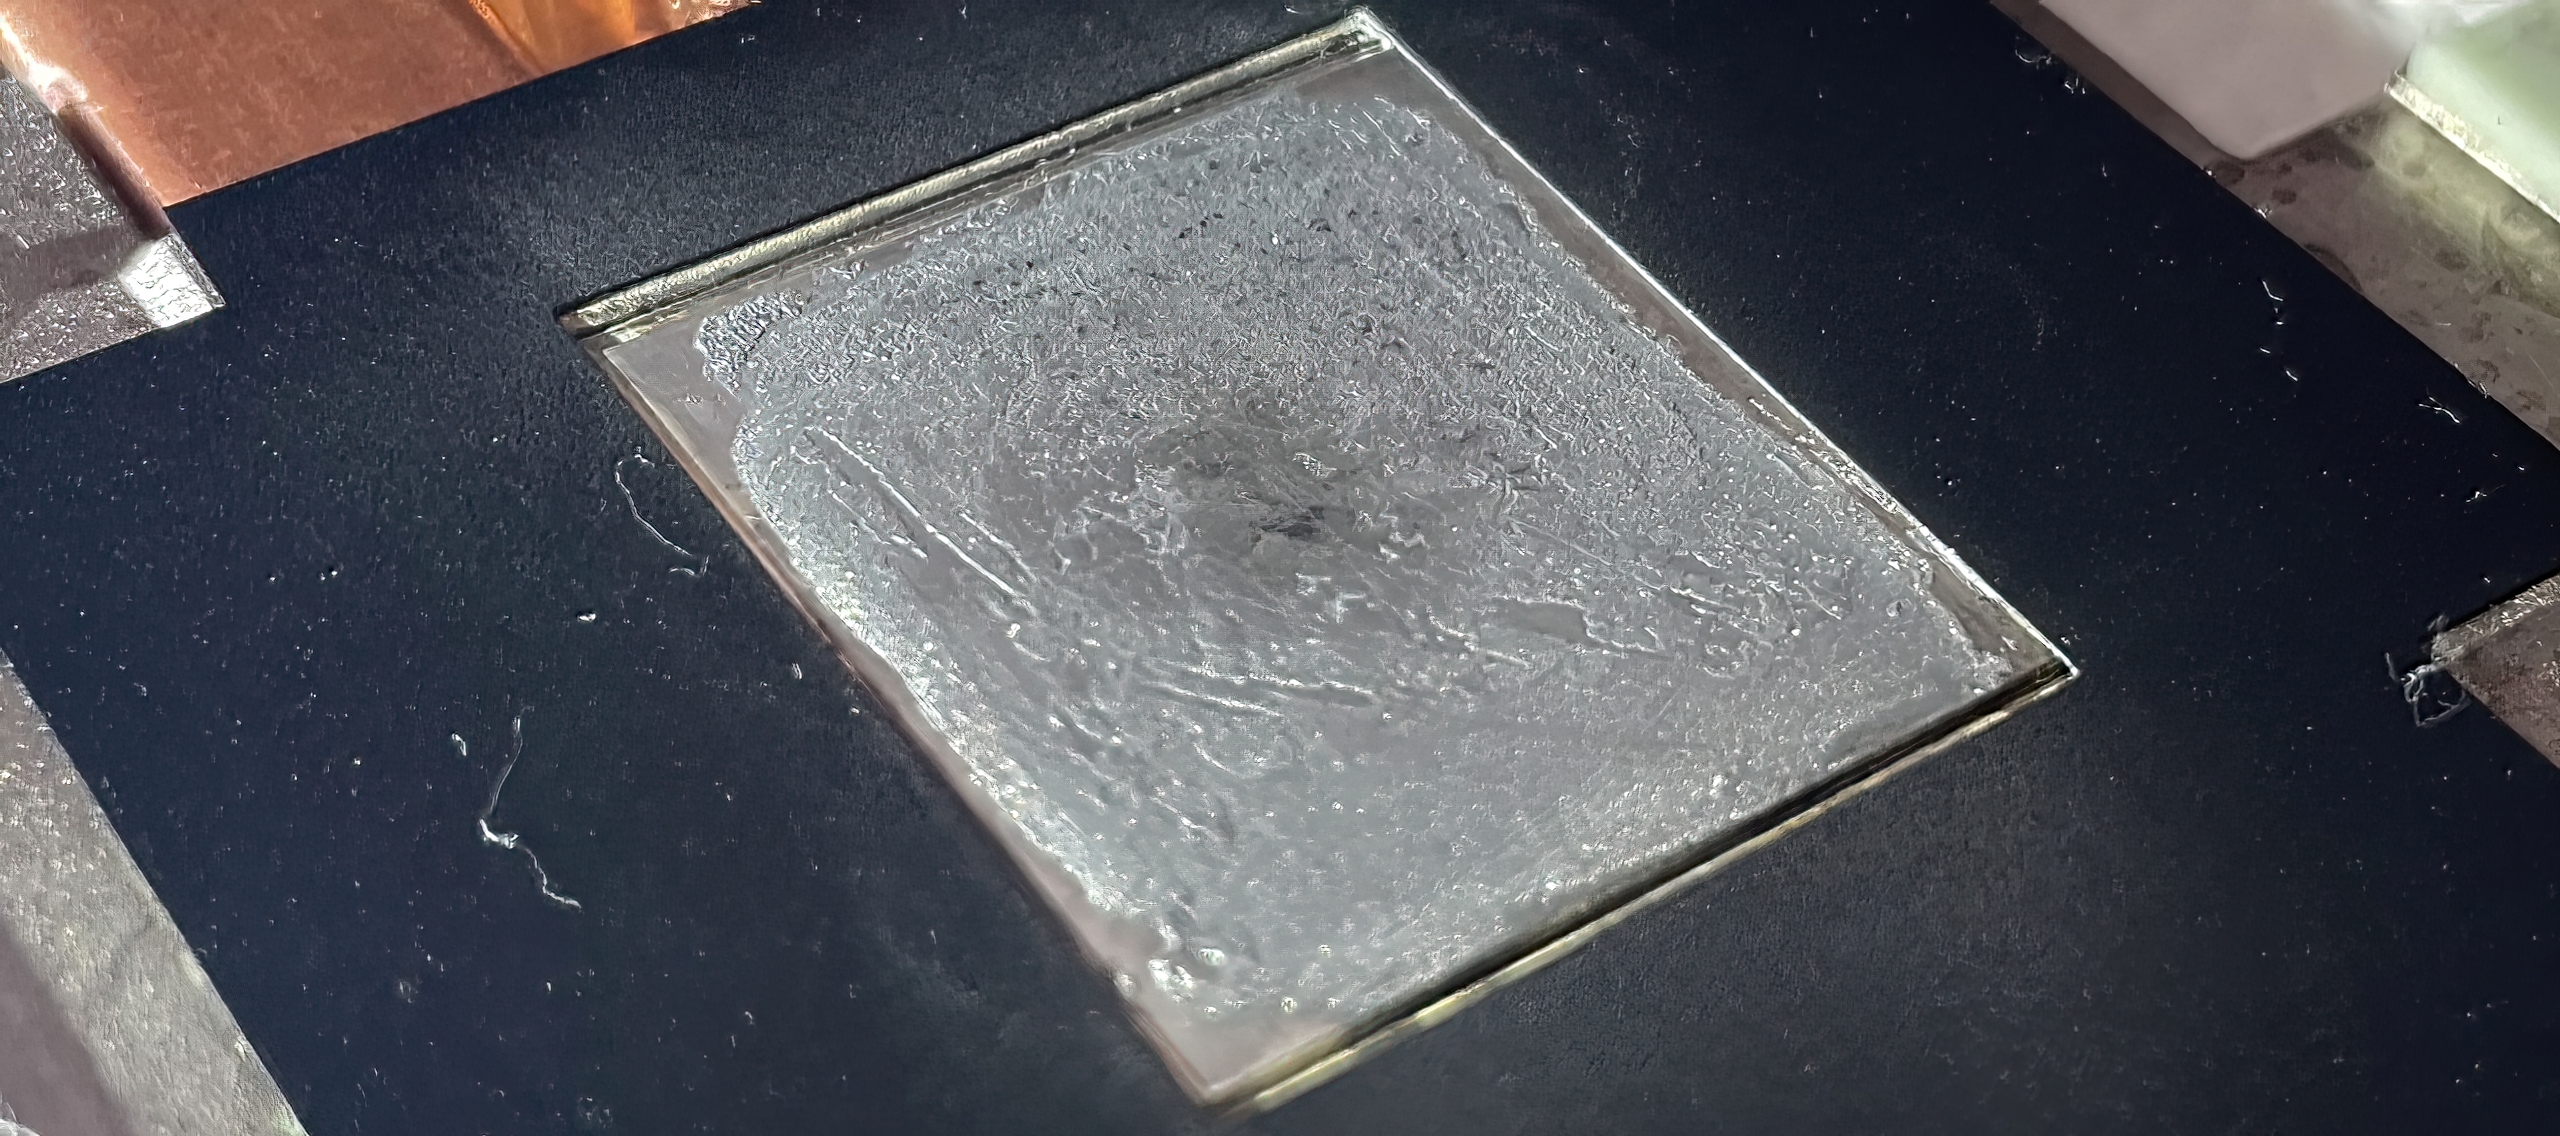 Laptop too hot, liquid metal as solution? What can already go wrong ...